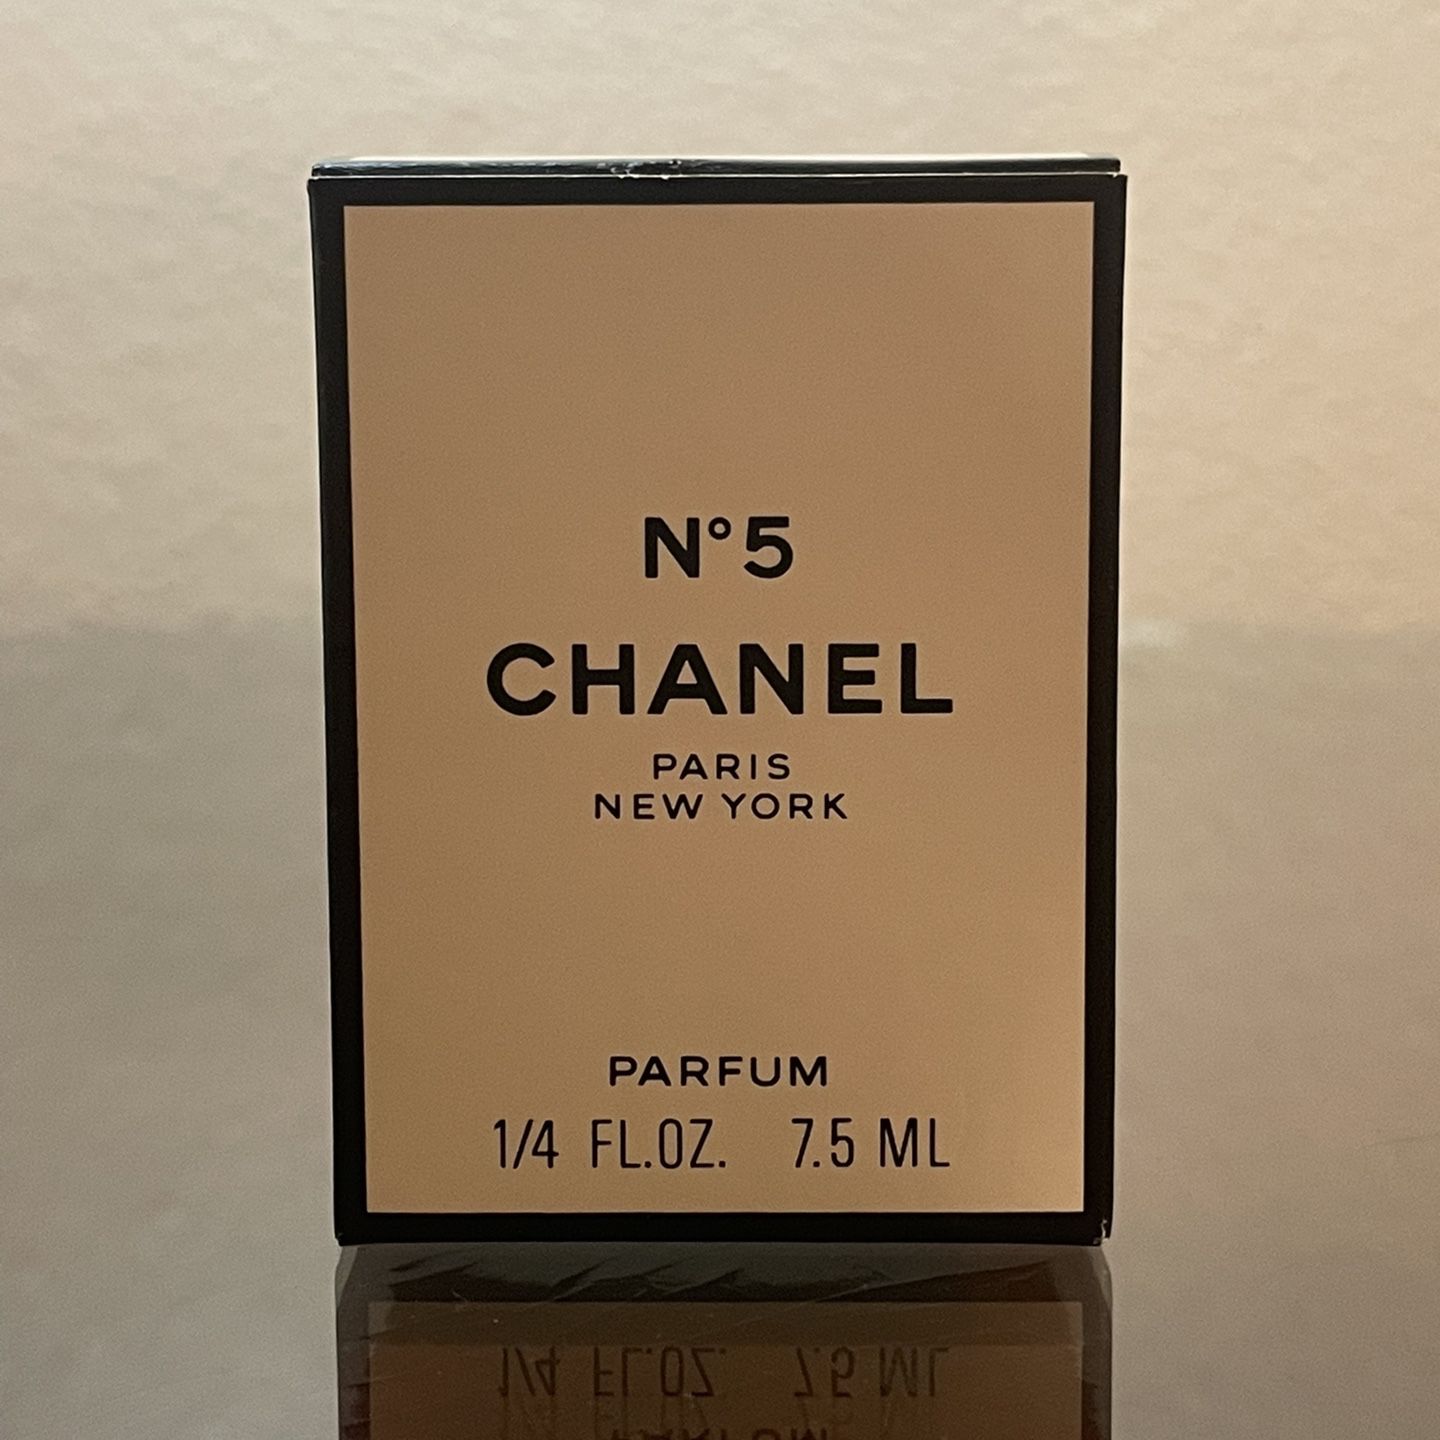 Chanel No. 5 Parfum 7.5mL New In Box for Sale in Irvine, CA - OfferUp